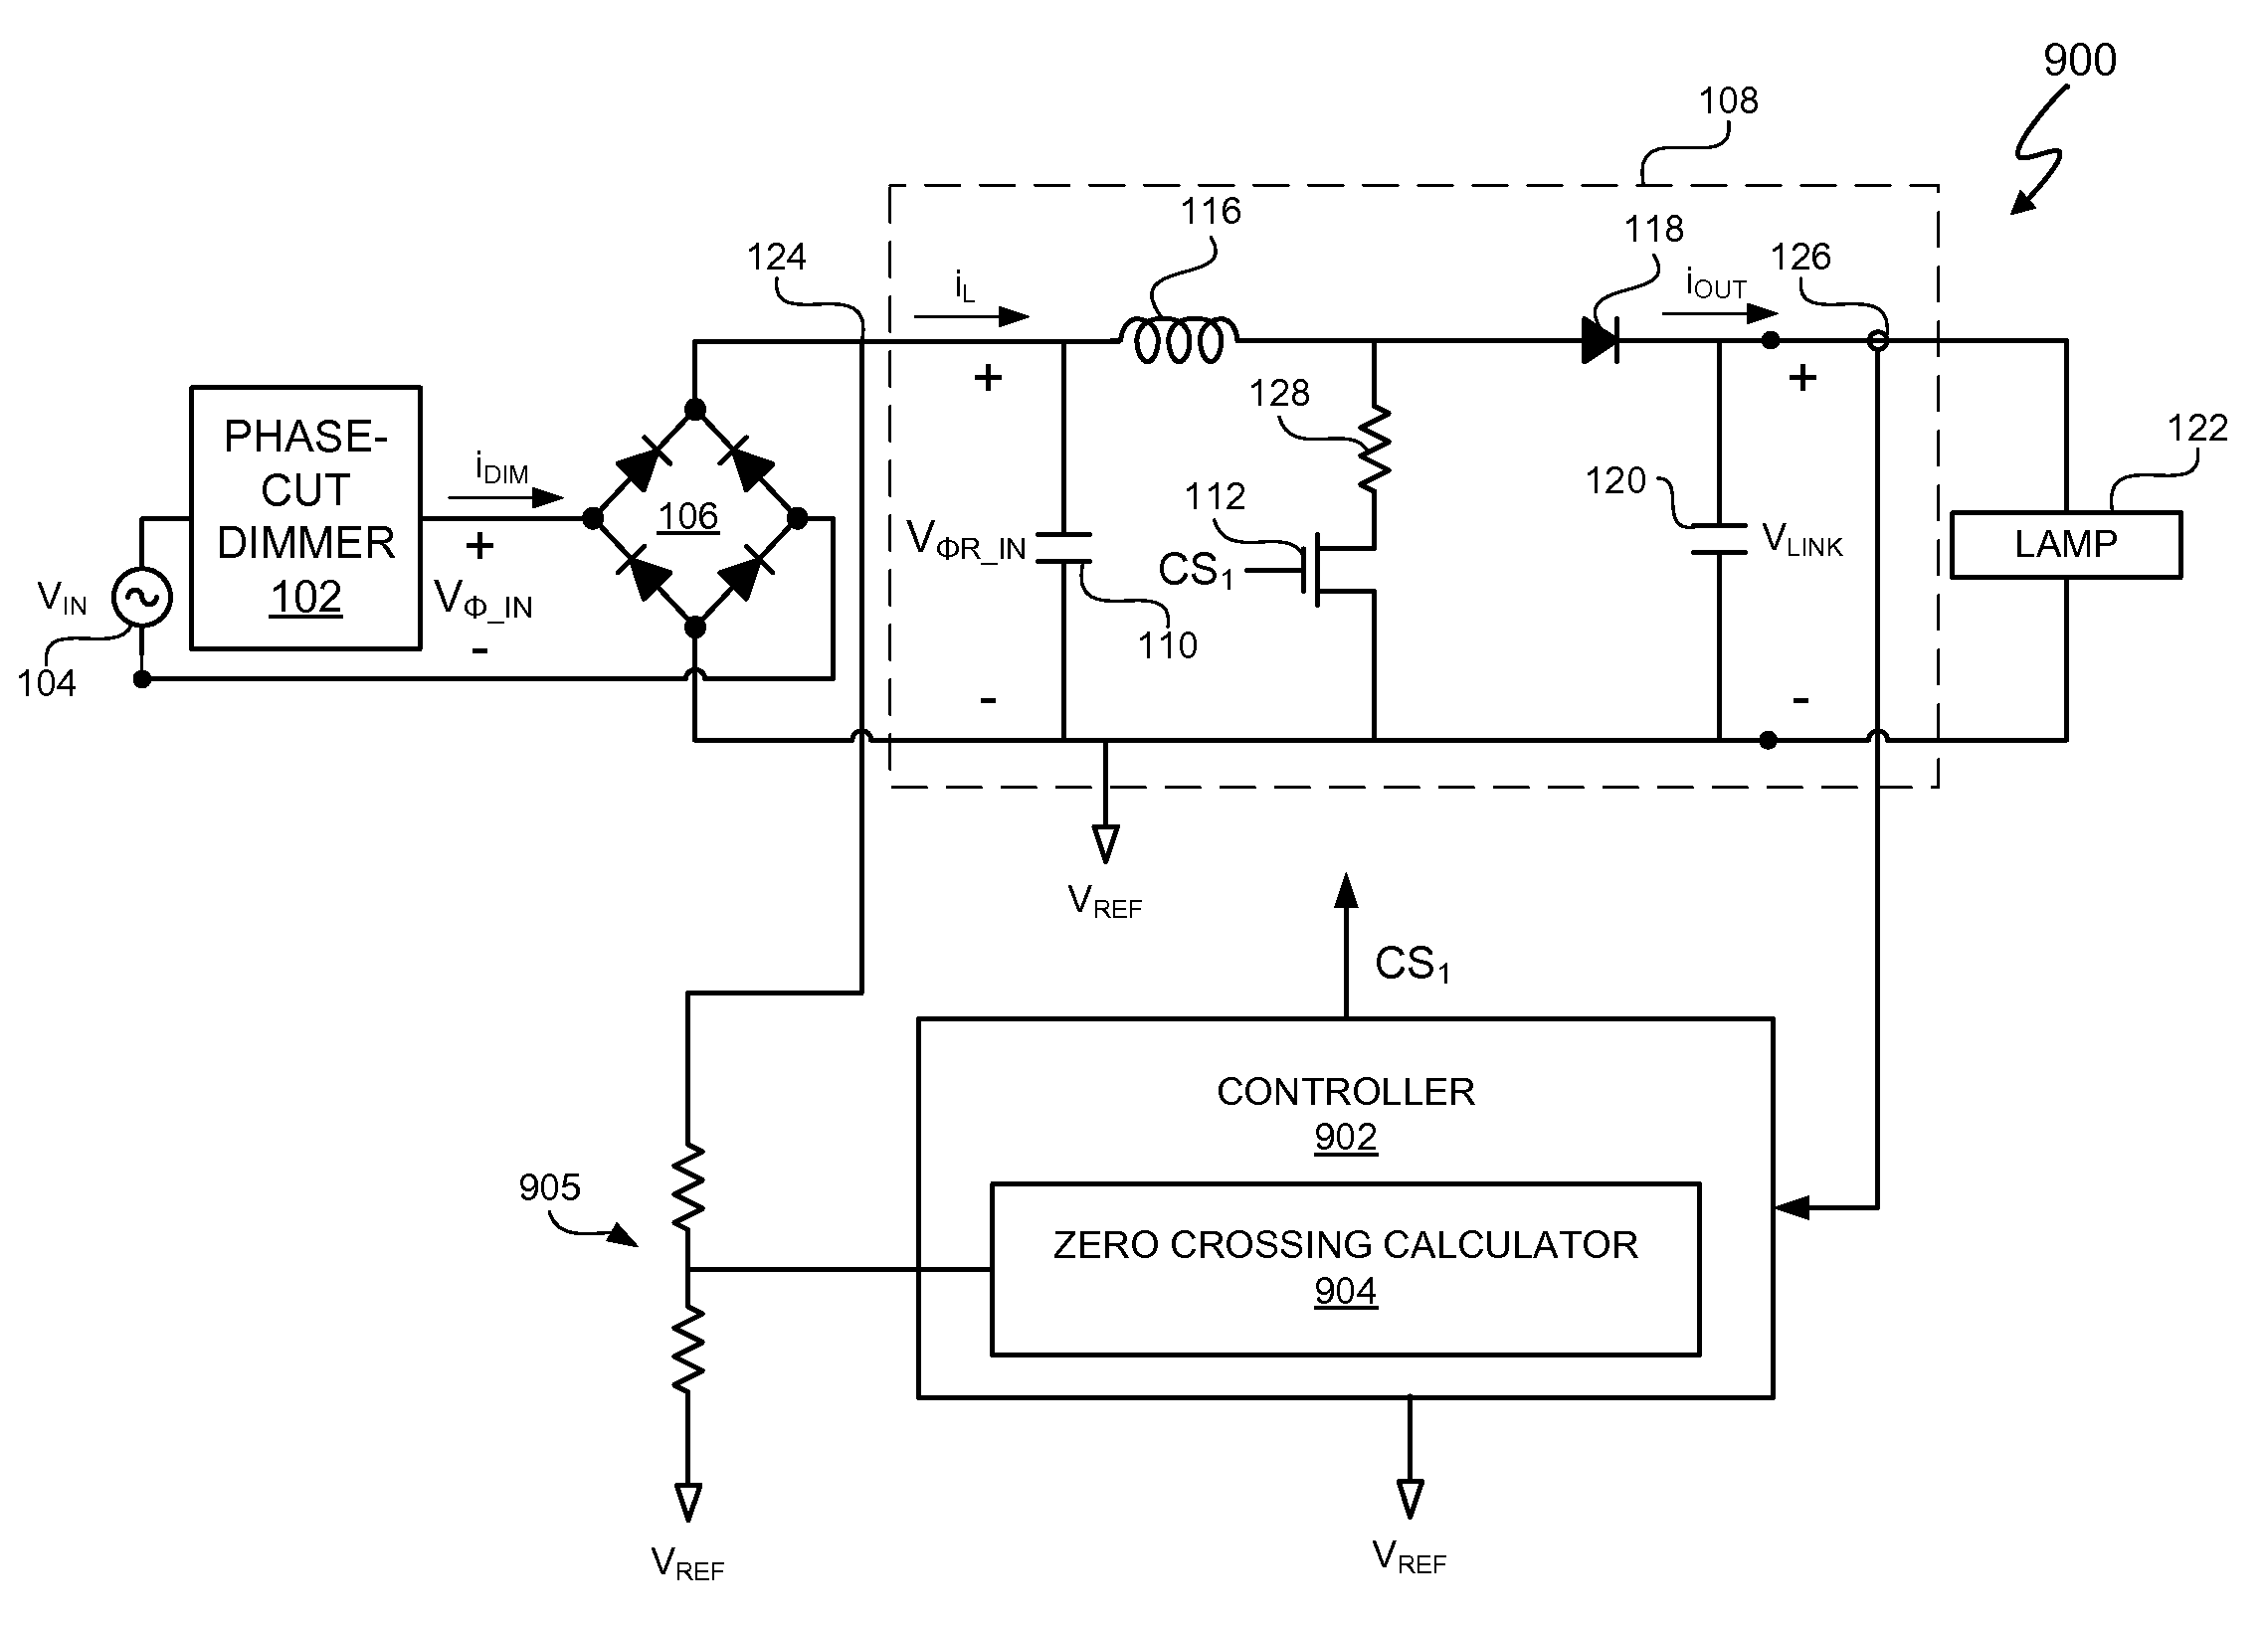 Switching power converter input voltage approximate zero crossing determination